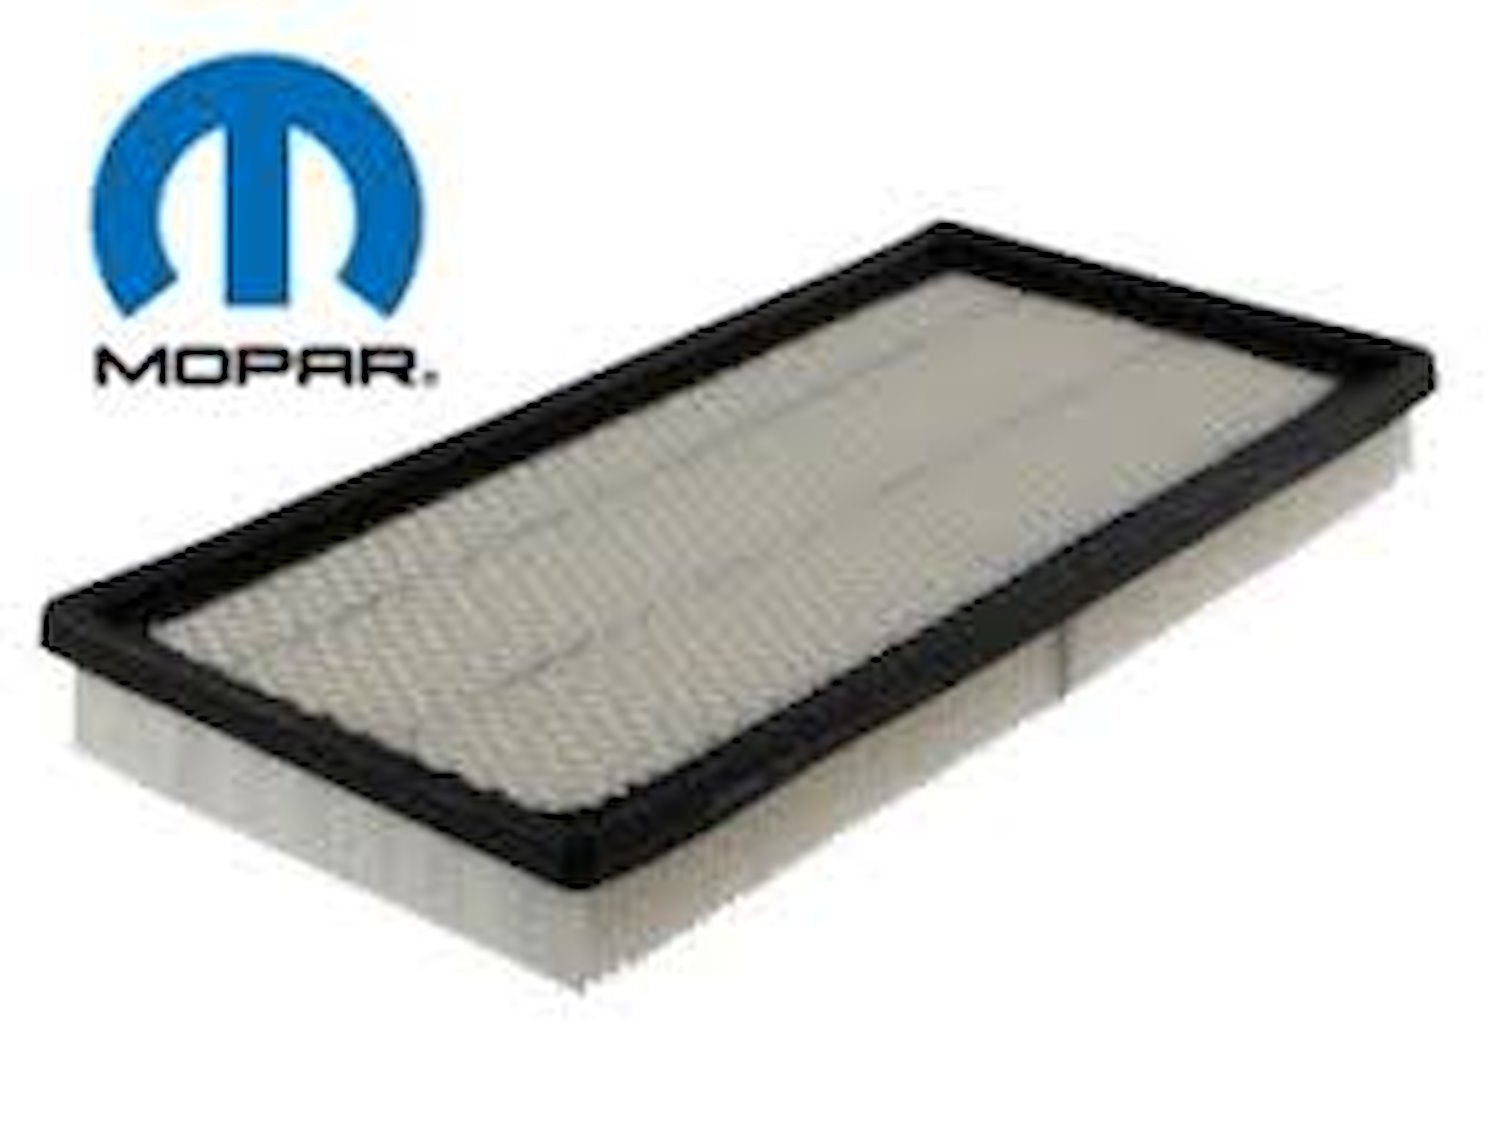 Replacement Dry Media Air Filter Fits 312-77060003AC, 312-77060006AB, 312-77060010AB, 312-77060011AB, 312-77070008